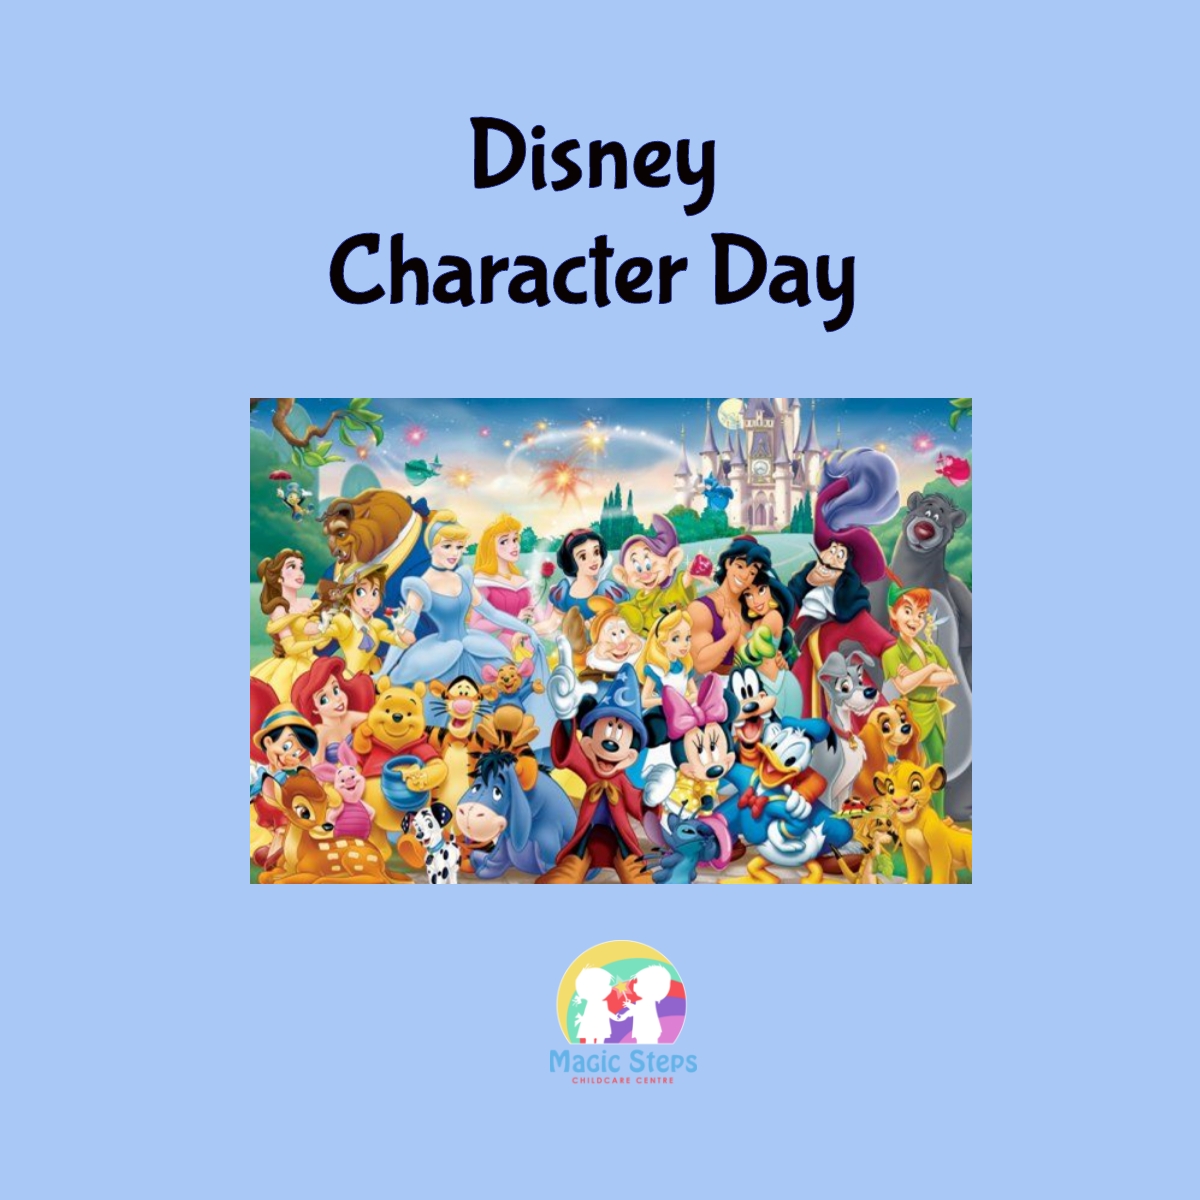 Disney Character Day- Wednesday 8th June